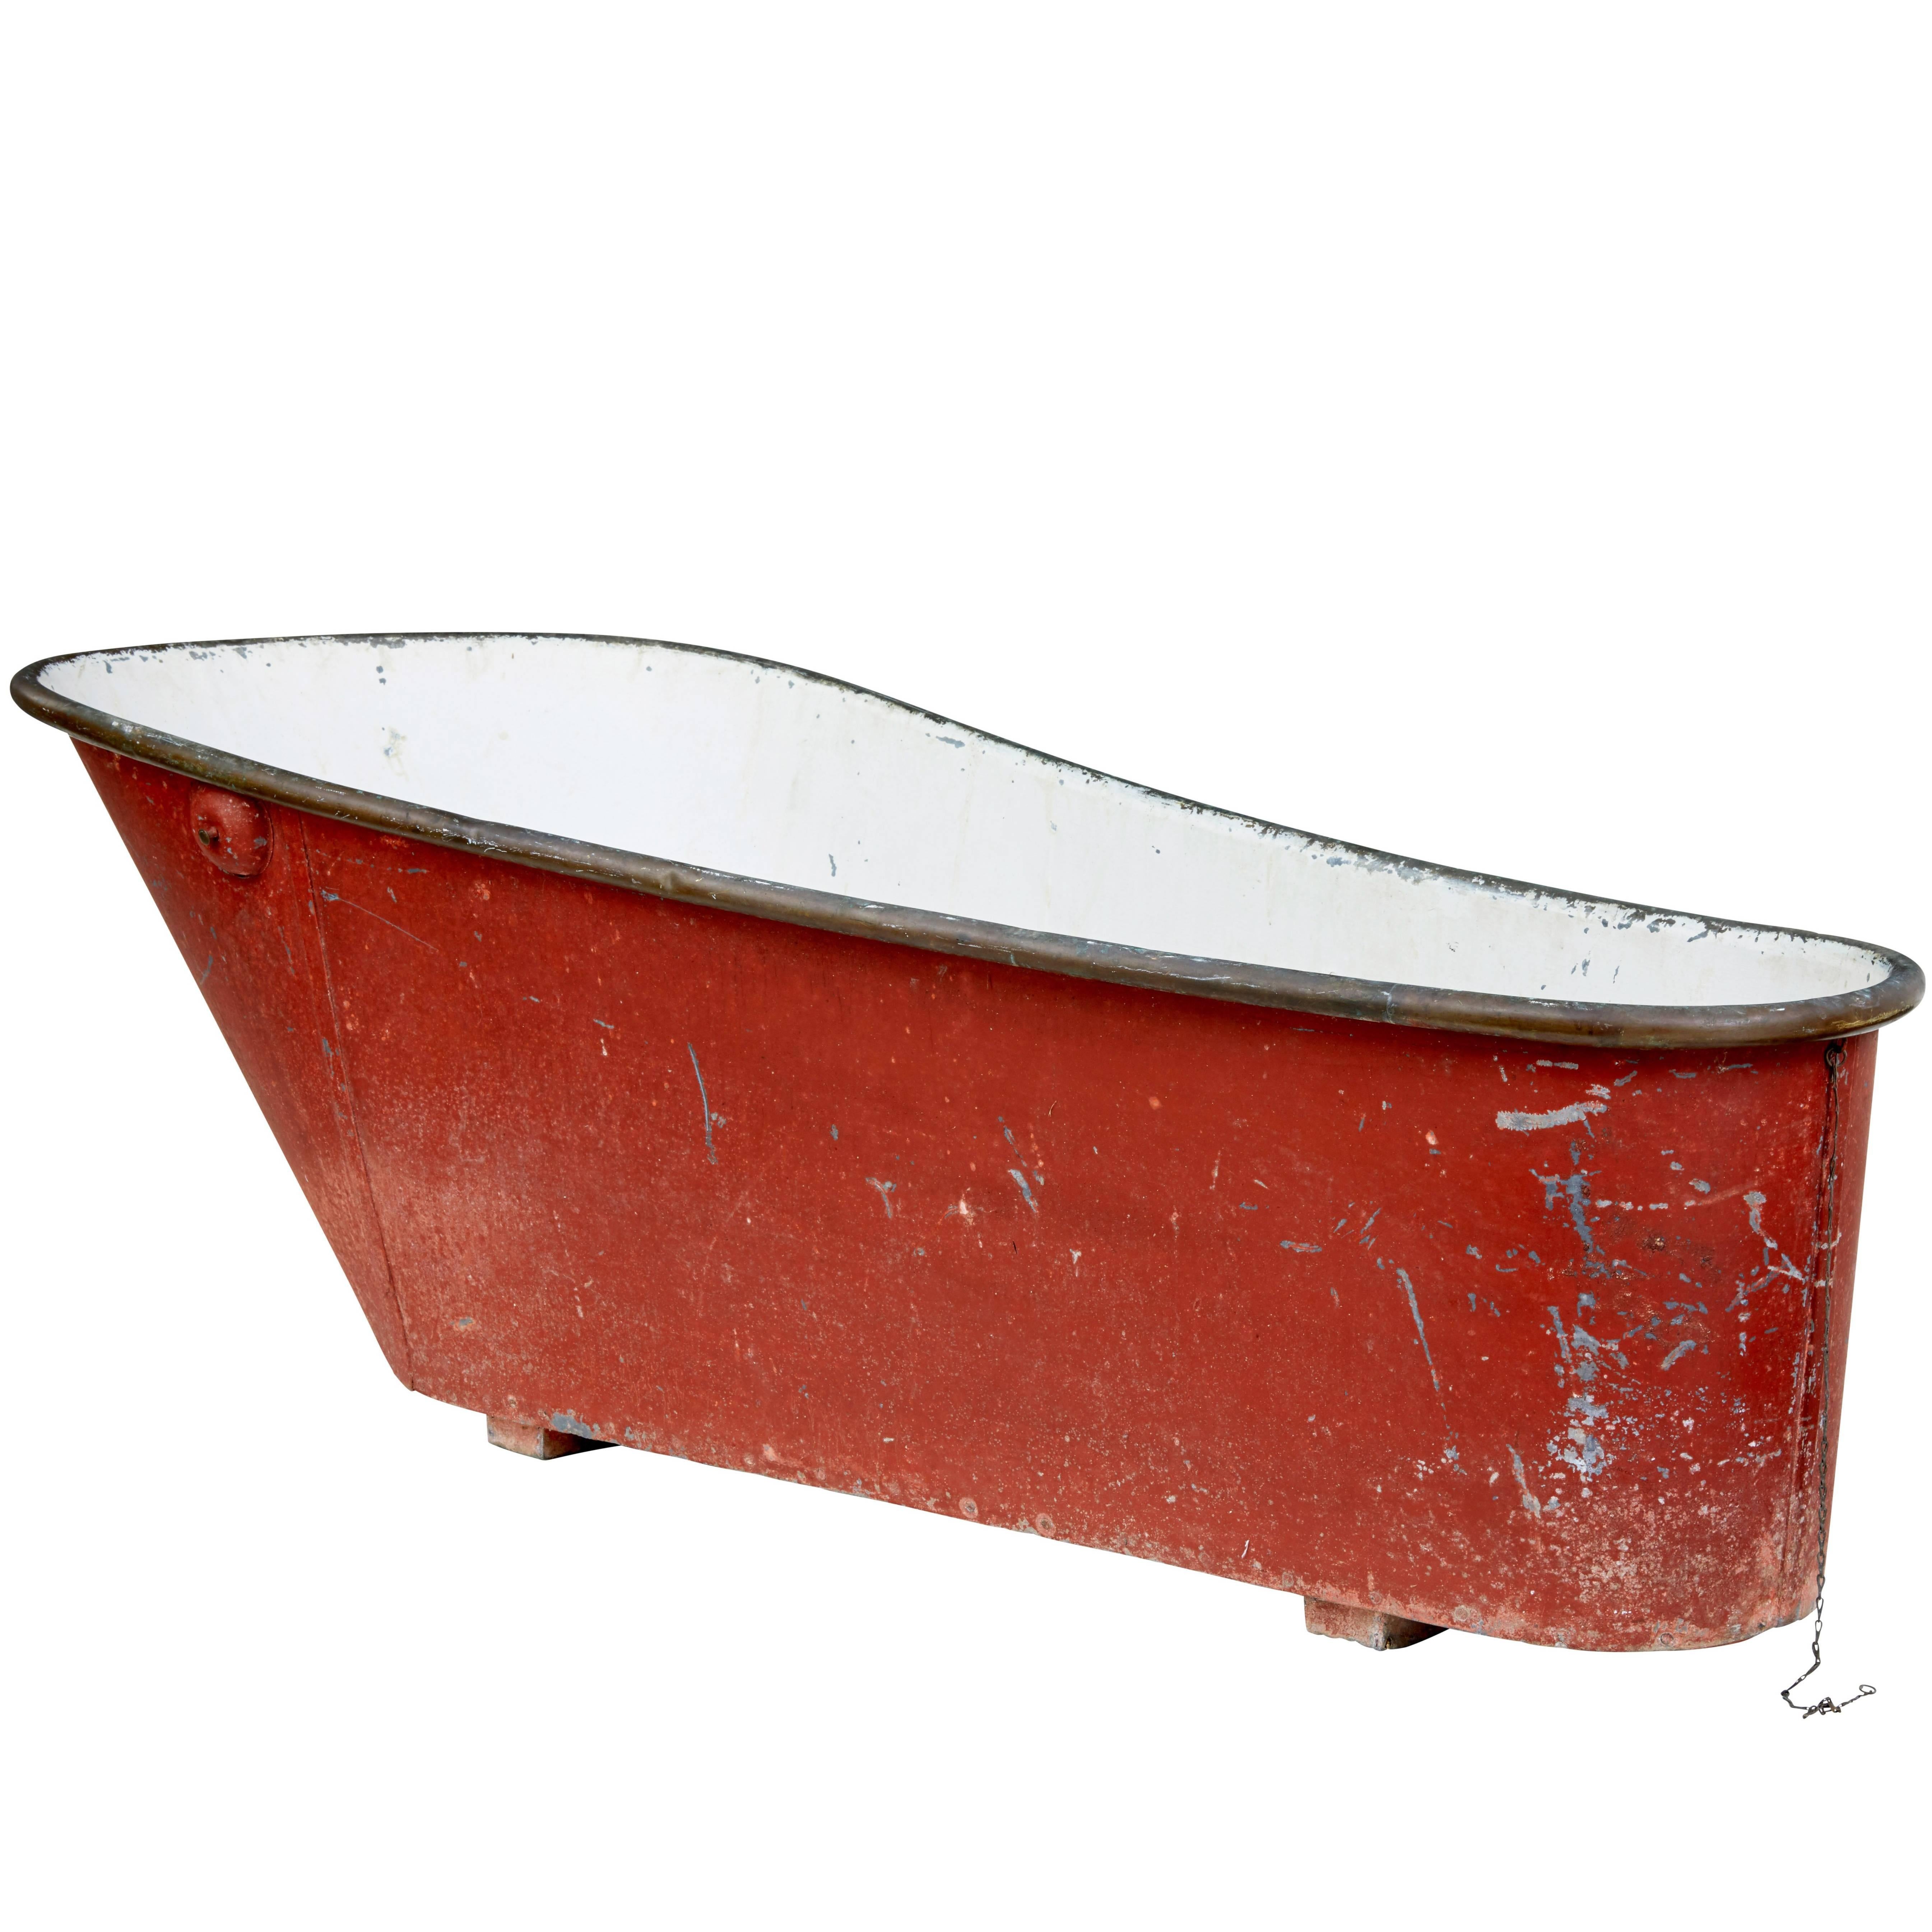 Late 19th Century Painted Copper and Tin Bath Tub